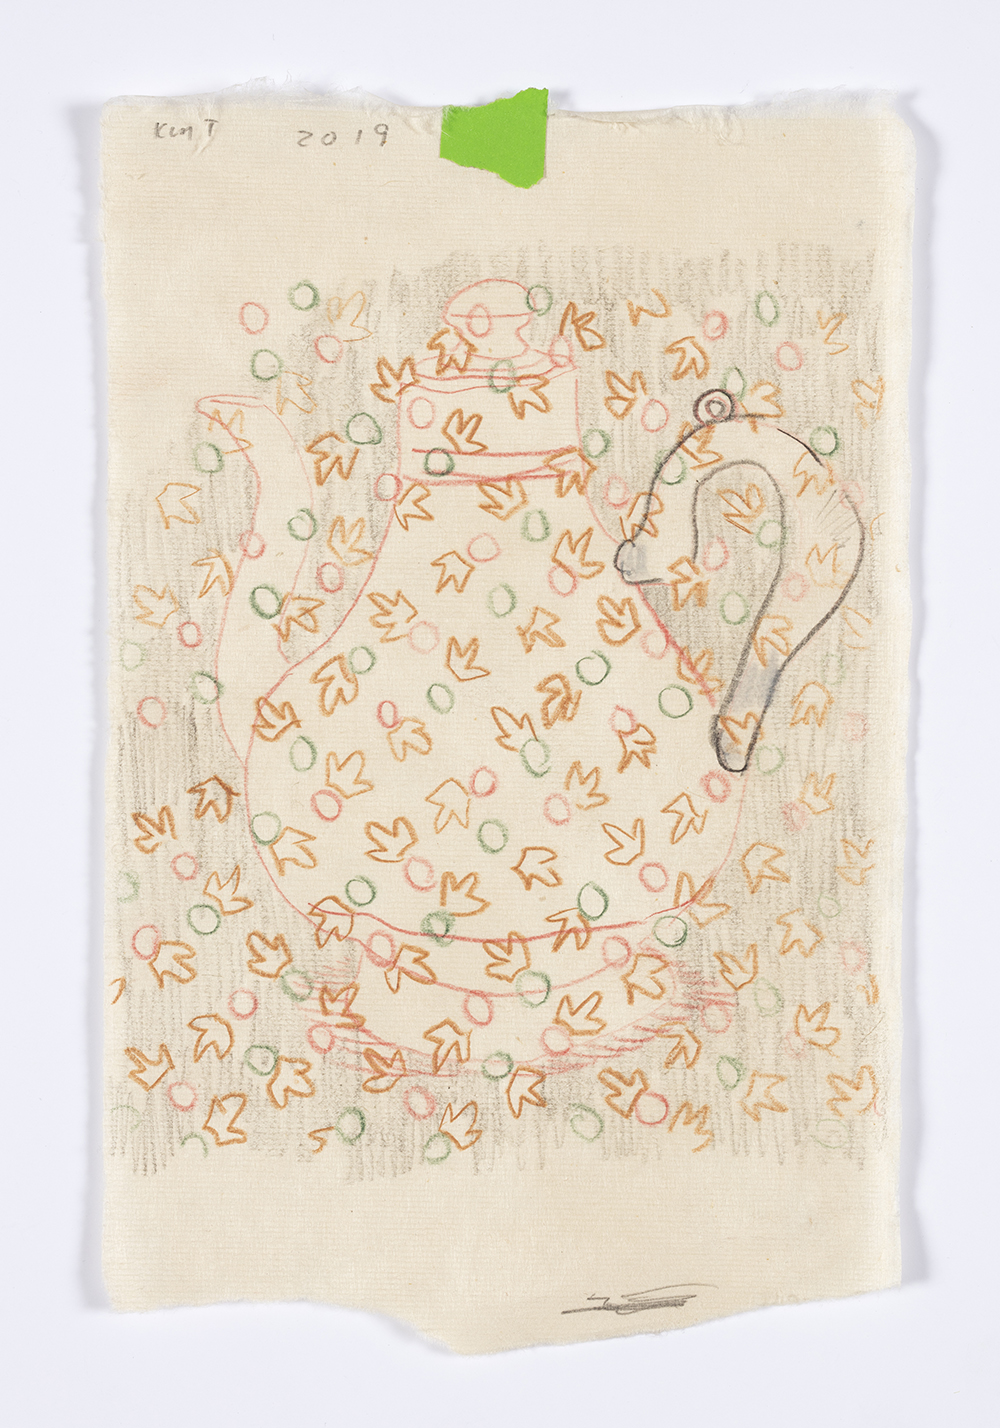 Kevin McNamee-Tweed. <em>Vessel with Pattern</em>, 2019. Graphite and colored pencil on mulberry paper,  8 1/2 x 5 1/2 inches  (21.6 x 14 cm)